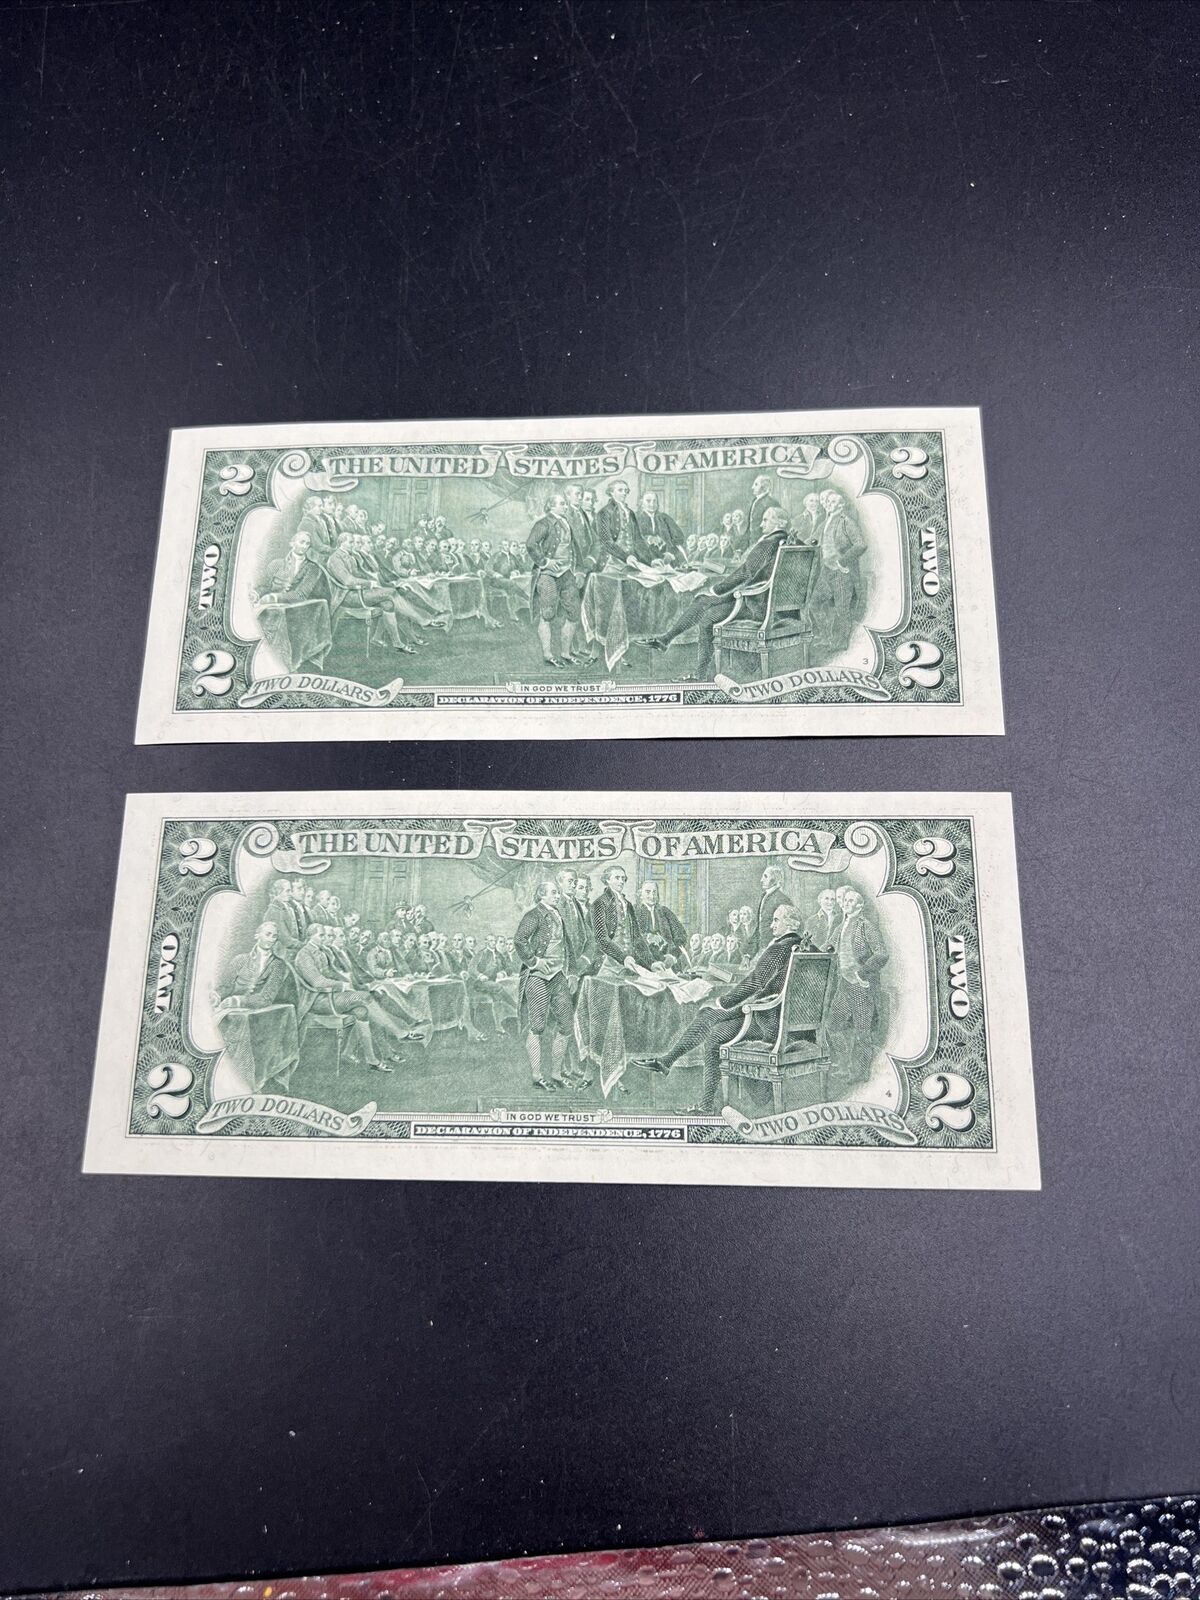 Two Consecutive Repeat Serial Number 2003 FRN $2 Two Dollar Bills Choice UNC #24